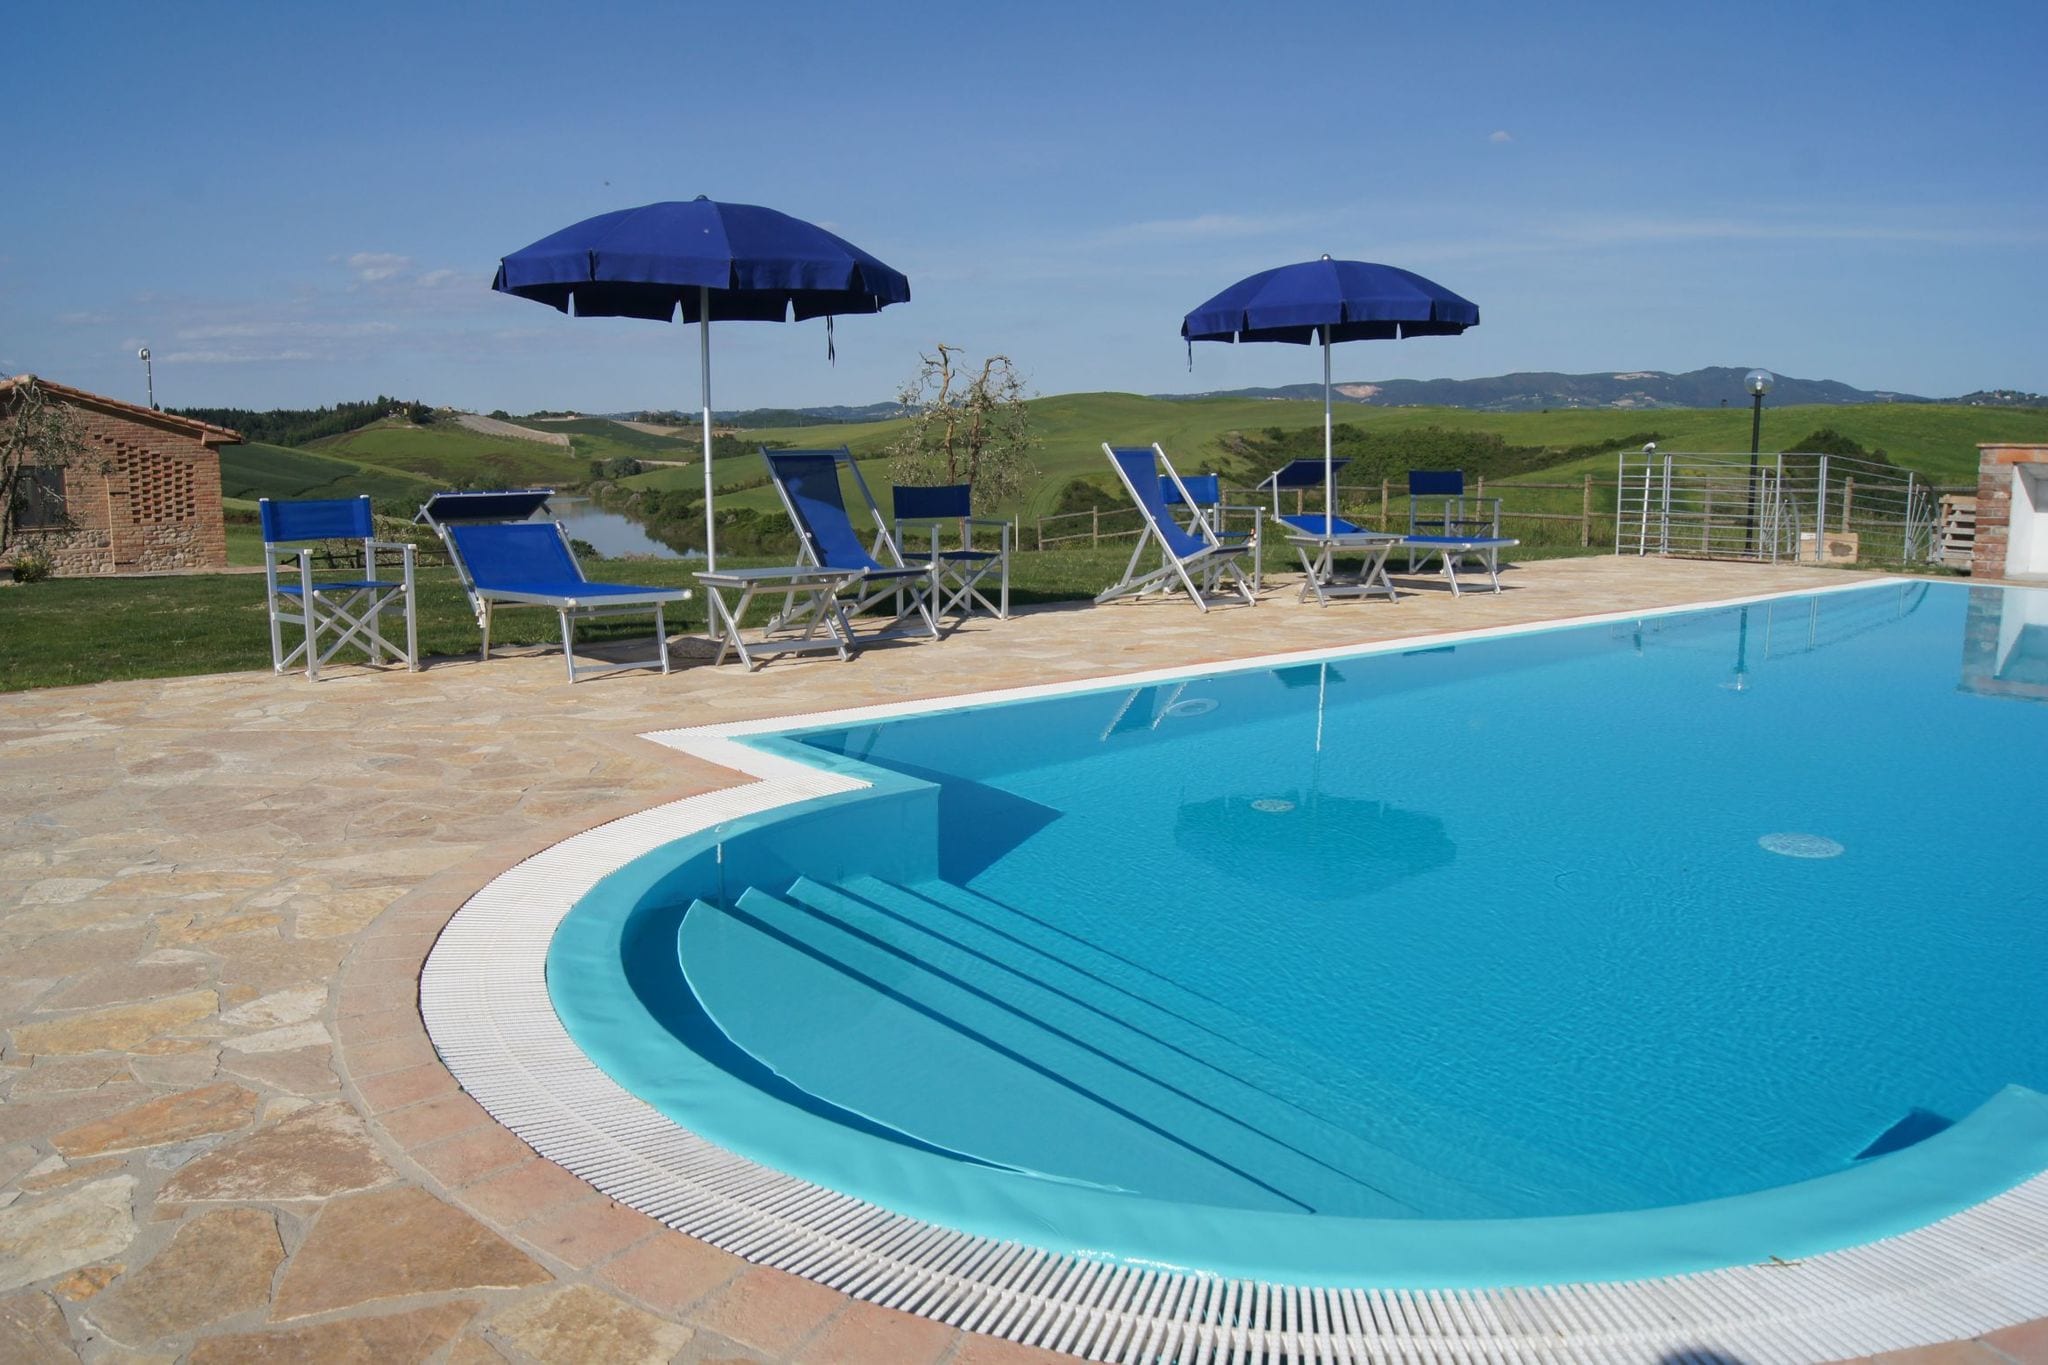 Cosy agriturismo in Toscana with outdoor swimming pool